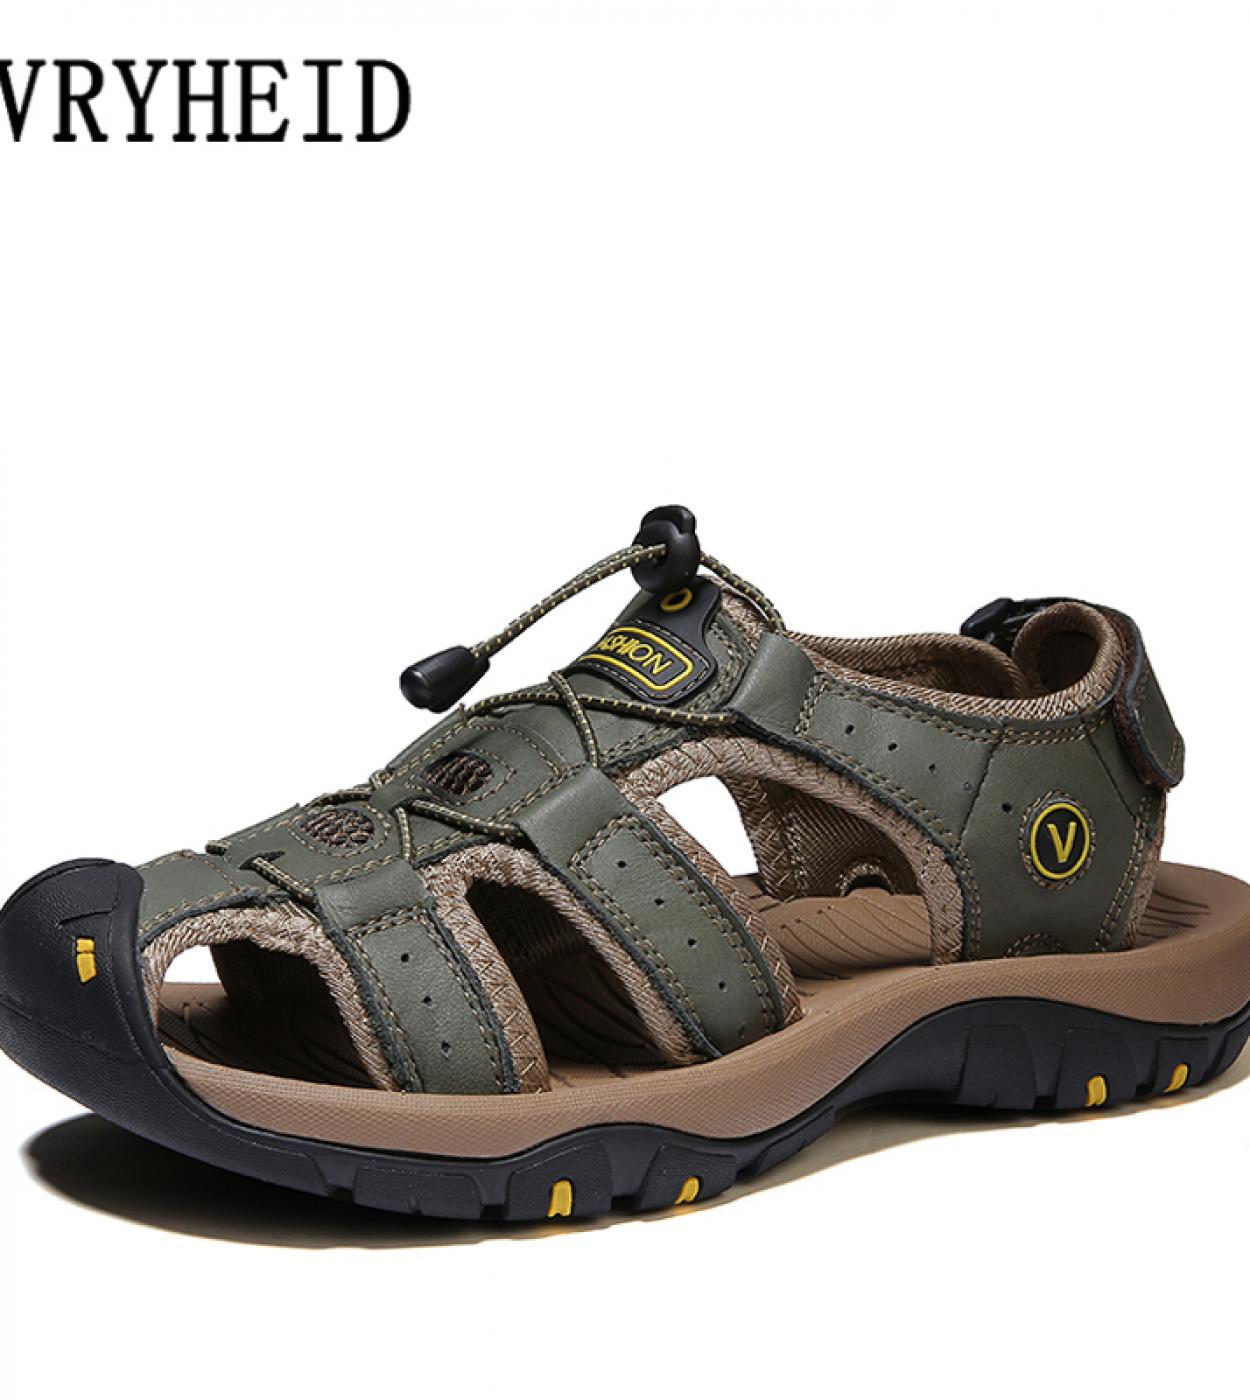 Vryheid Summer Platform Mens Sandals Genuine Leather Luxury Beach Wading Shoes Non Slip Outdoors Sport Casual Hiking Si